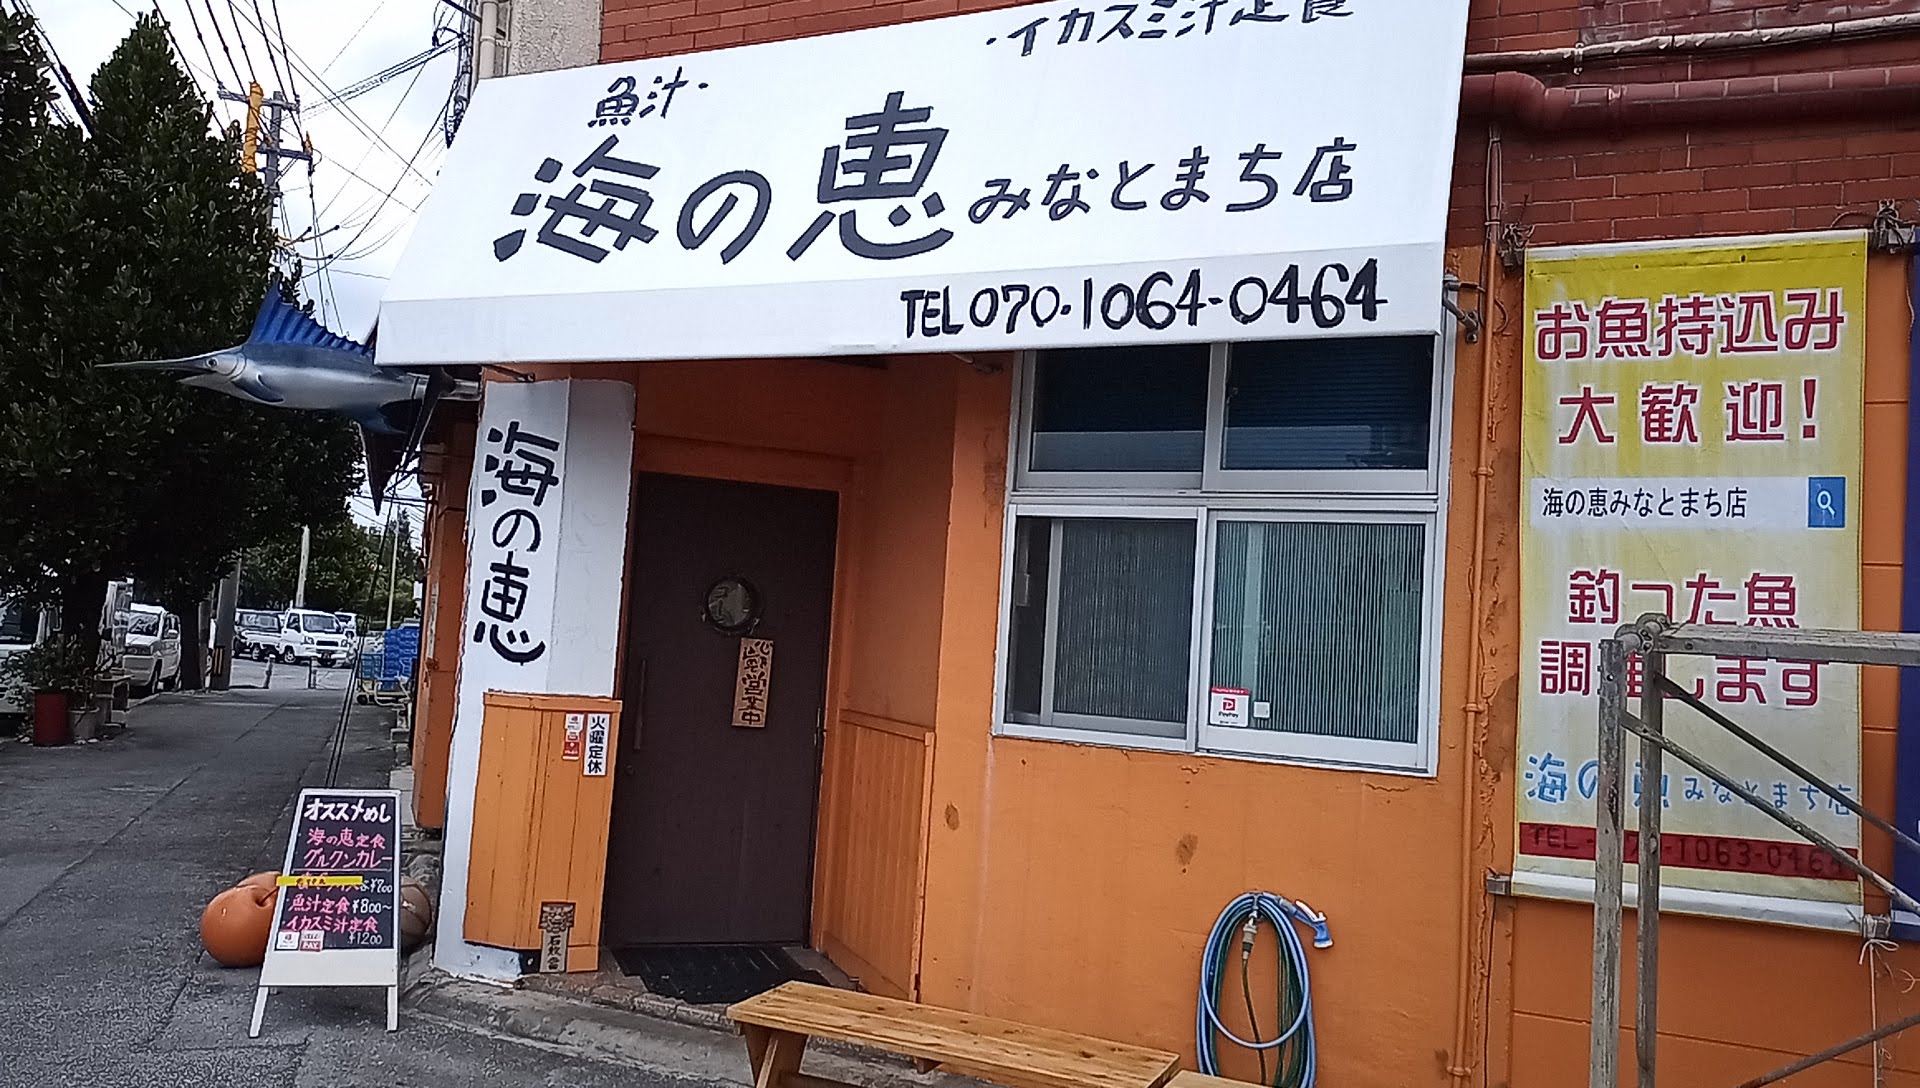 The Umi no megumi where you can eat delicious fish dishes at reasonable prices